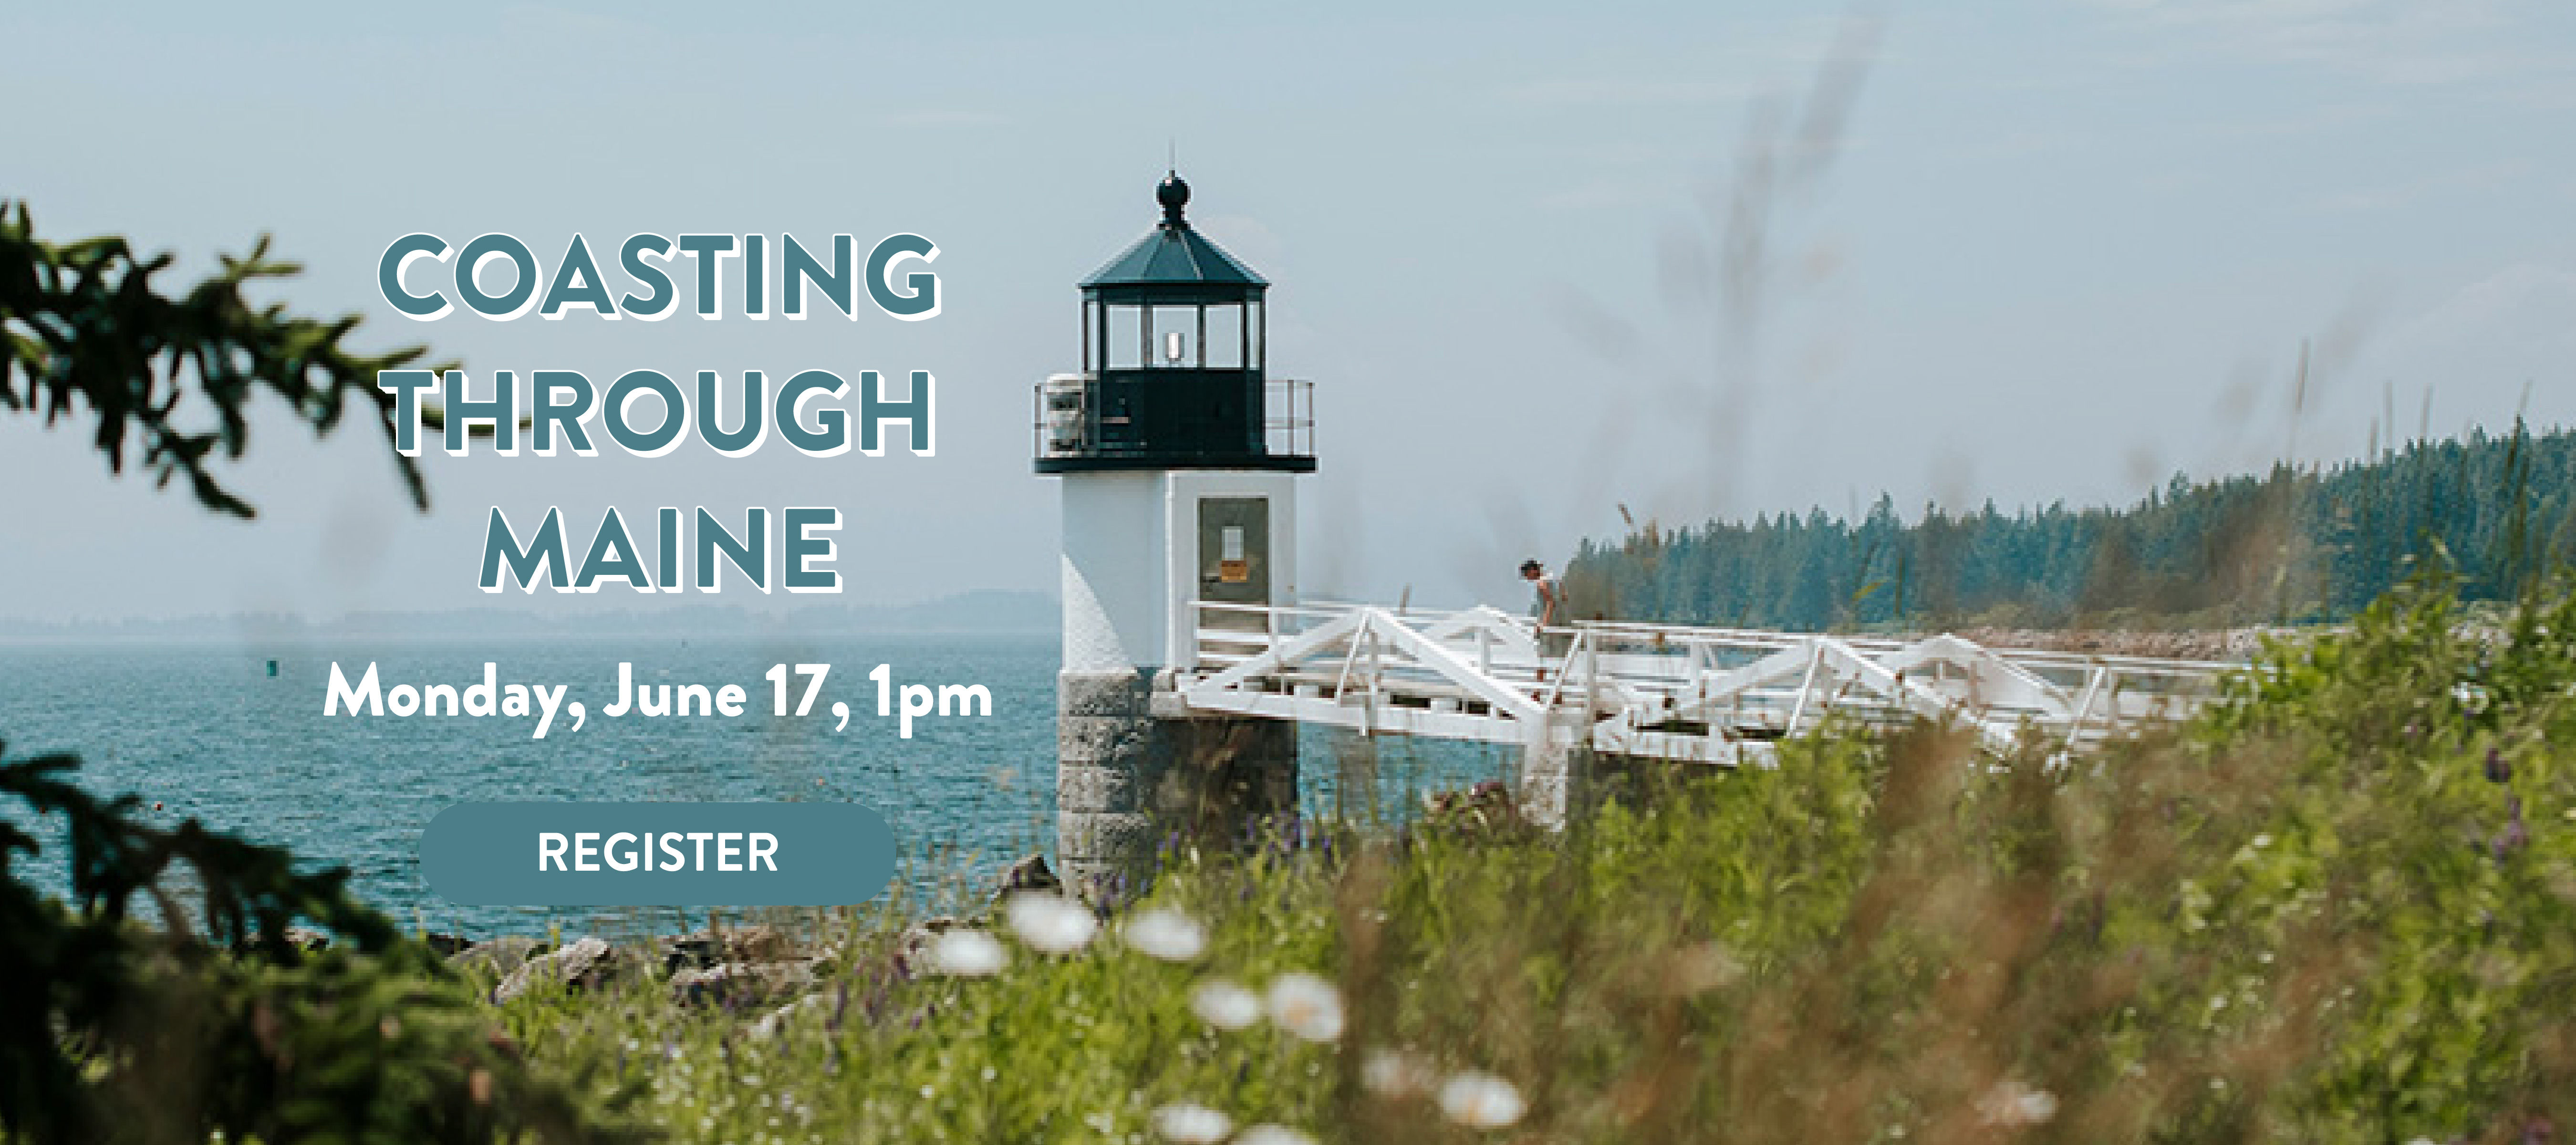 phpl, Prospect Heights Public Library, Coasting Through Maine, explore Maine's sand beaches, charming villages, and natural beauty, sightsee through Maine, In-person and virtual, Adult